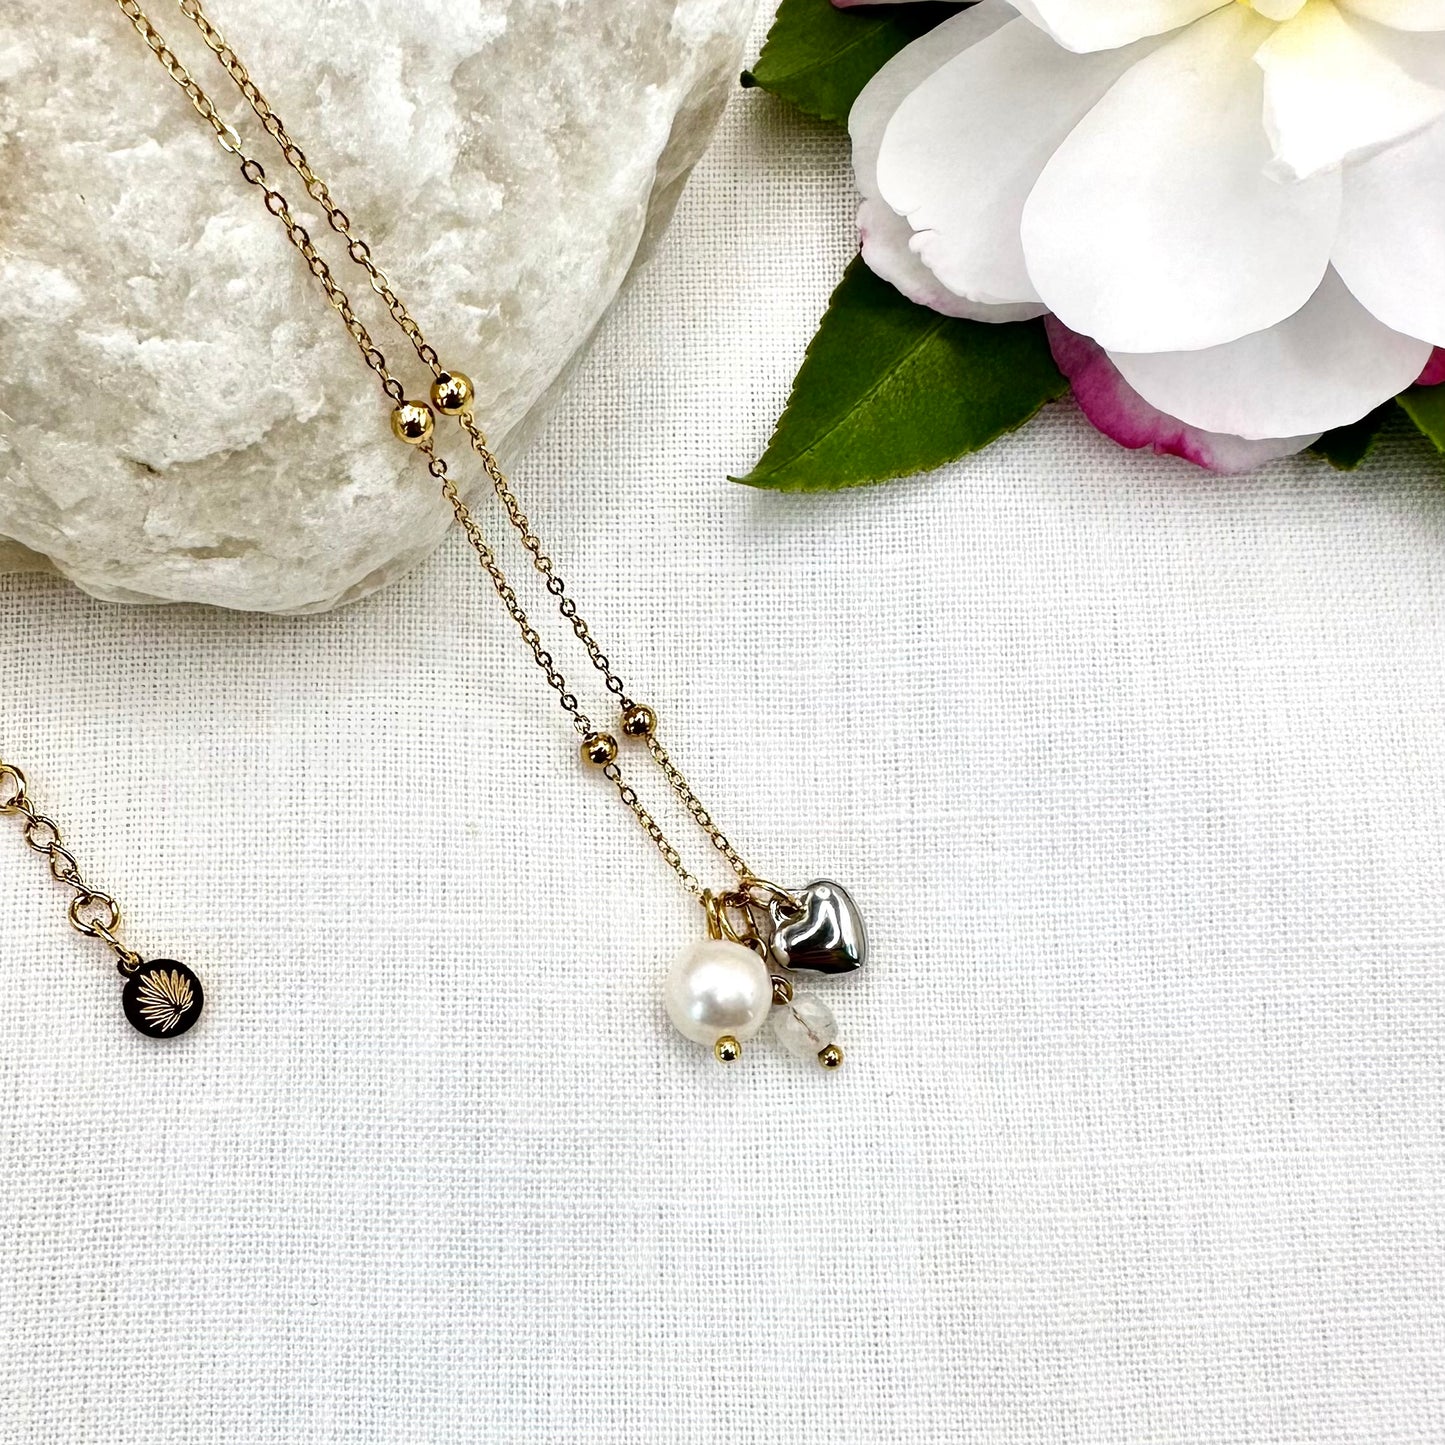 June Birthstone Moonstone Charm Necklace with Natural Pearl and Heart